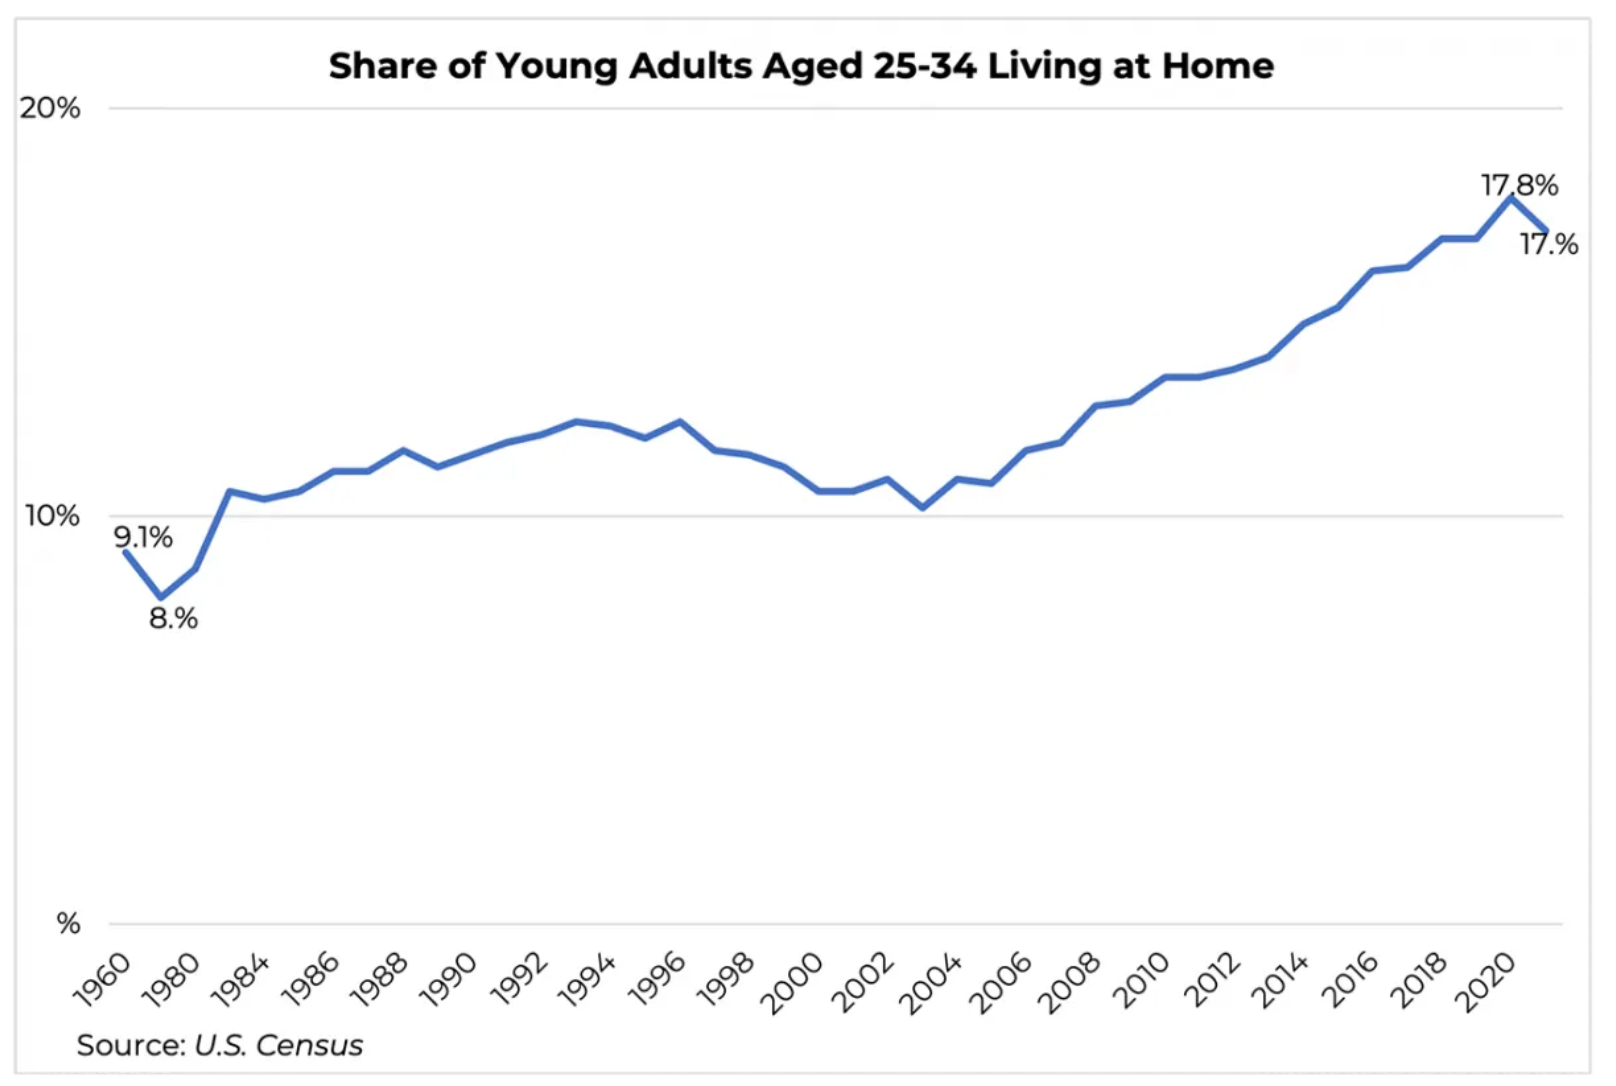 A line graph charting the rate over time at which young adults 25-34 are living at home.